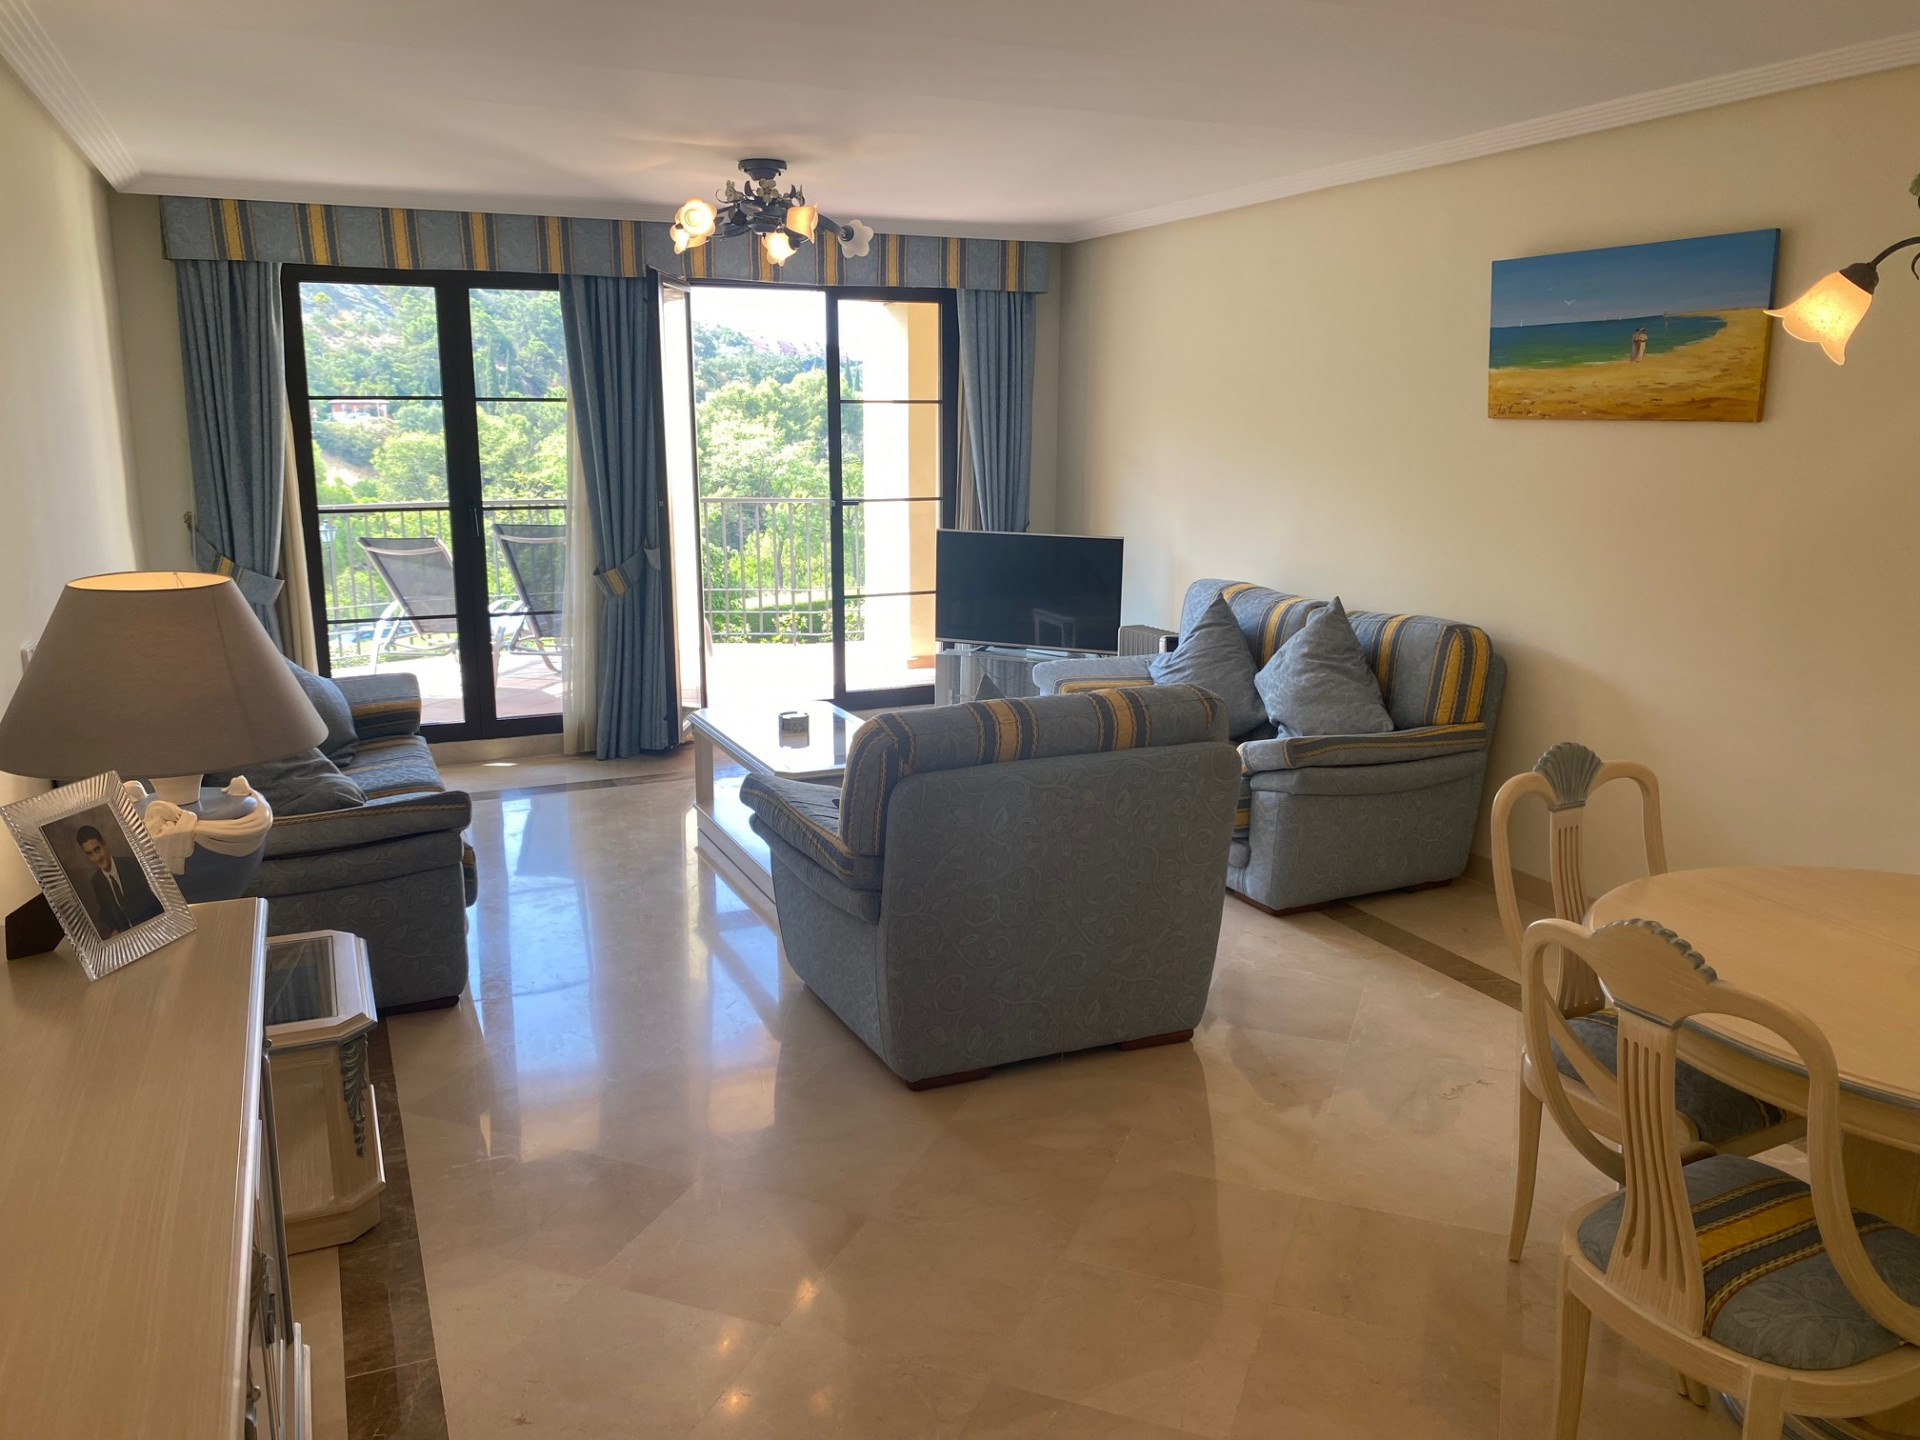 3 bedroom apartment very well located in Los Arqueros Golf.